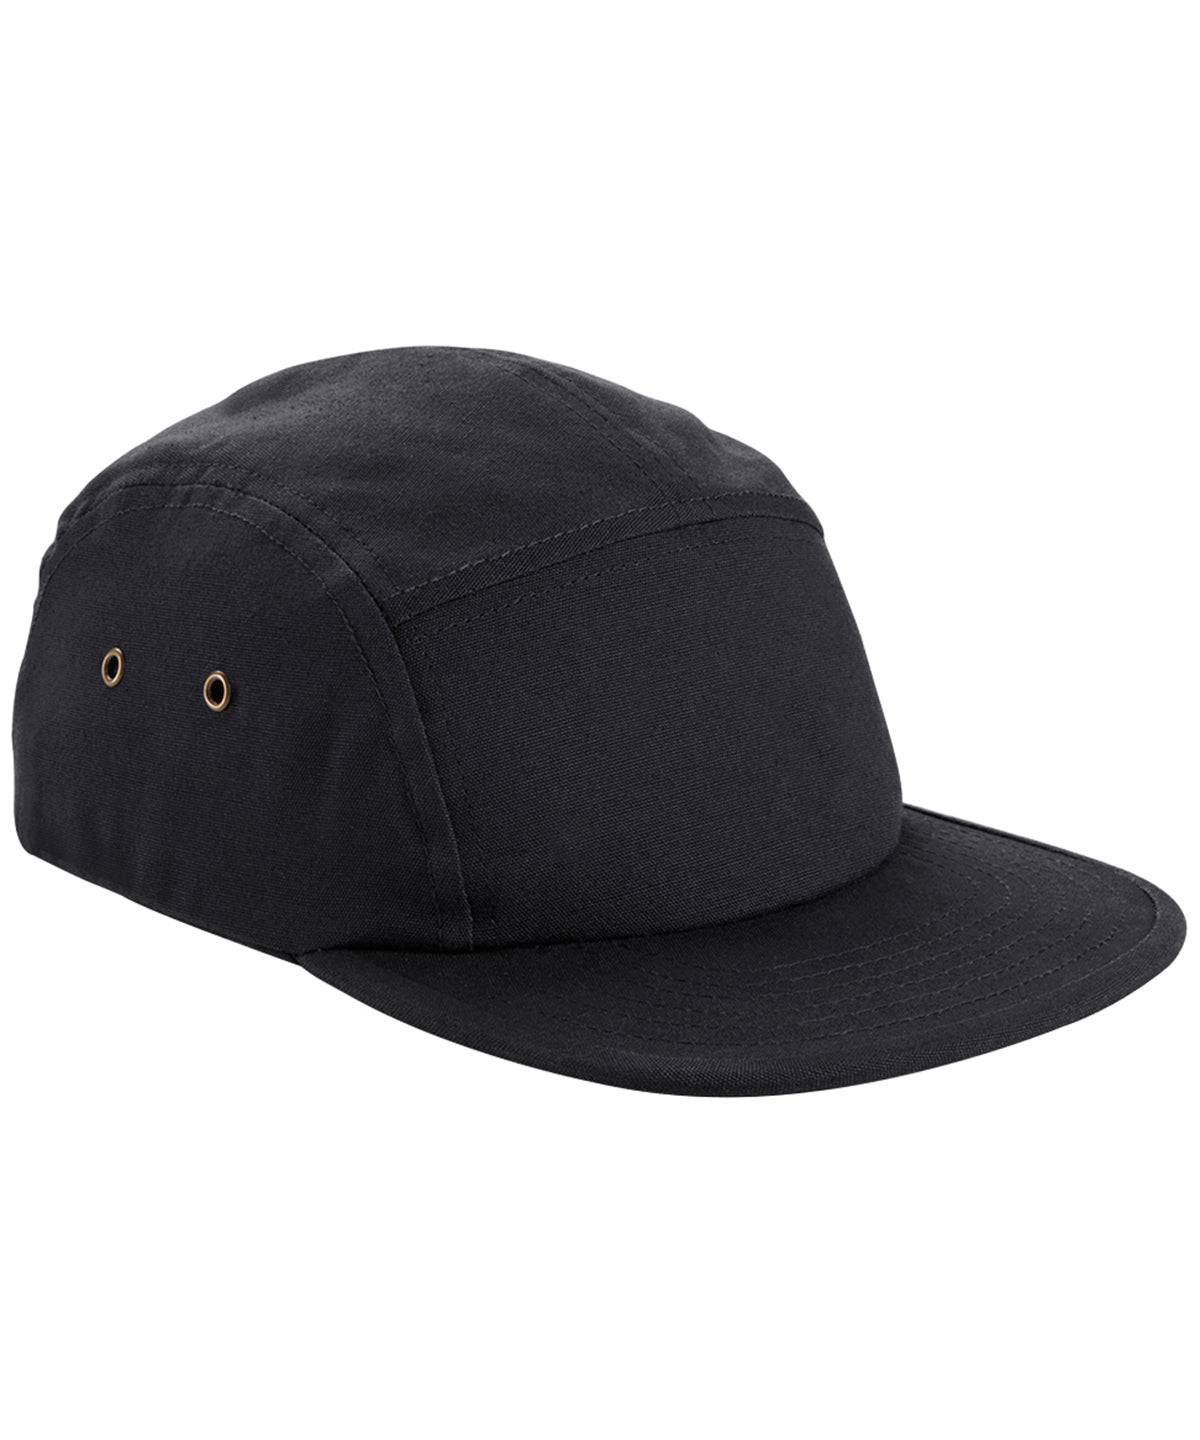 Load image into Gallery viewer, Black - Canvas 5-panel camper cap
